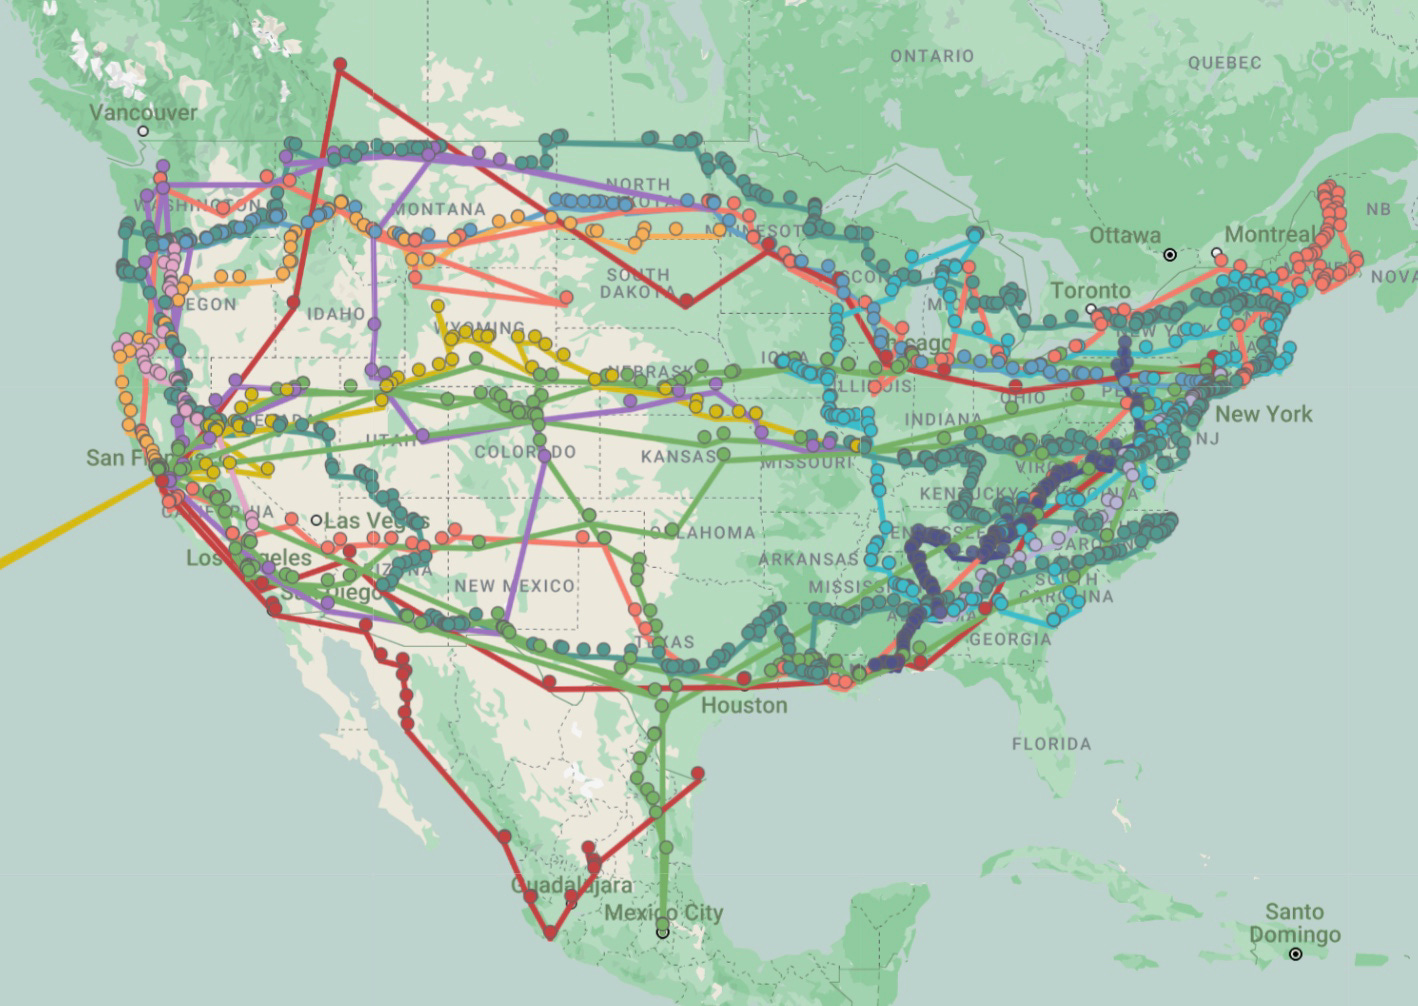 It's a map of America with coloured lines denoting each separate road trip. You can click on the blobs to bring up quotes from the books in question. Not in this picture, but in the one on the page you reach if you click on the link in the paragraph above.